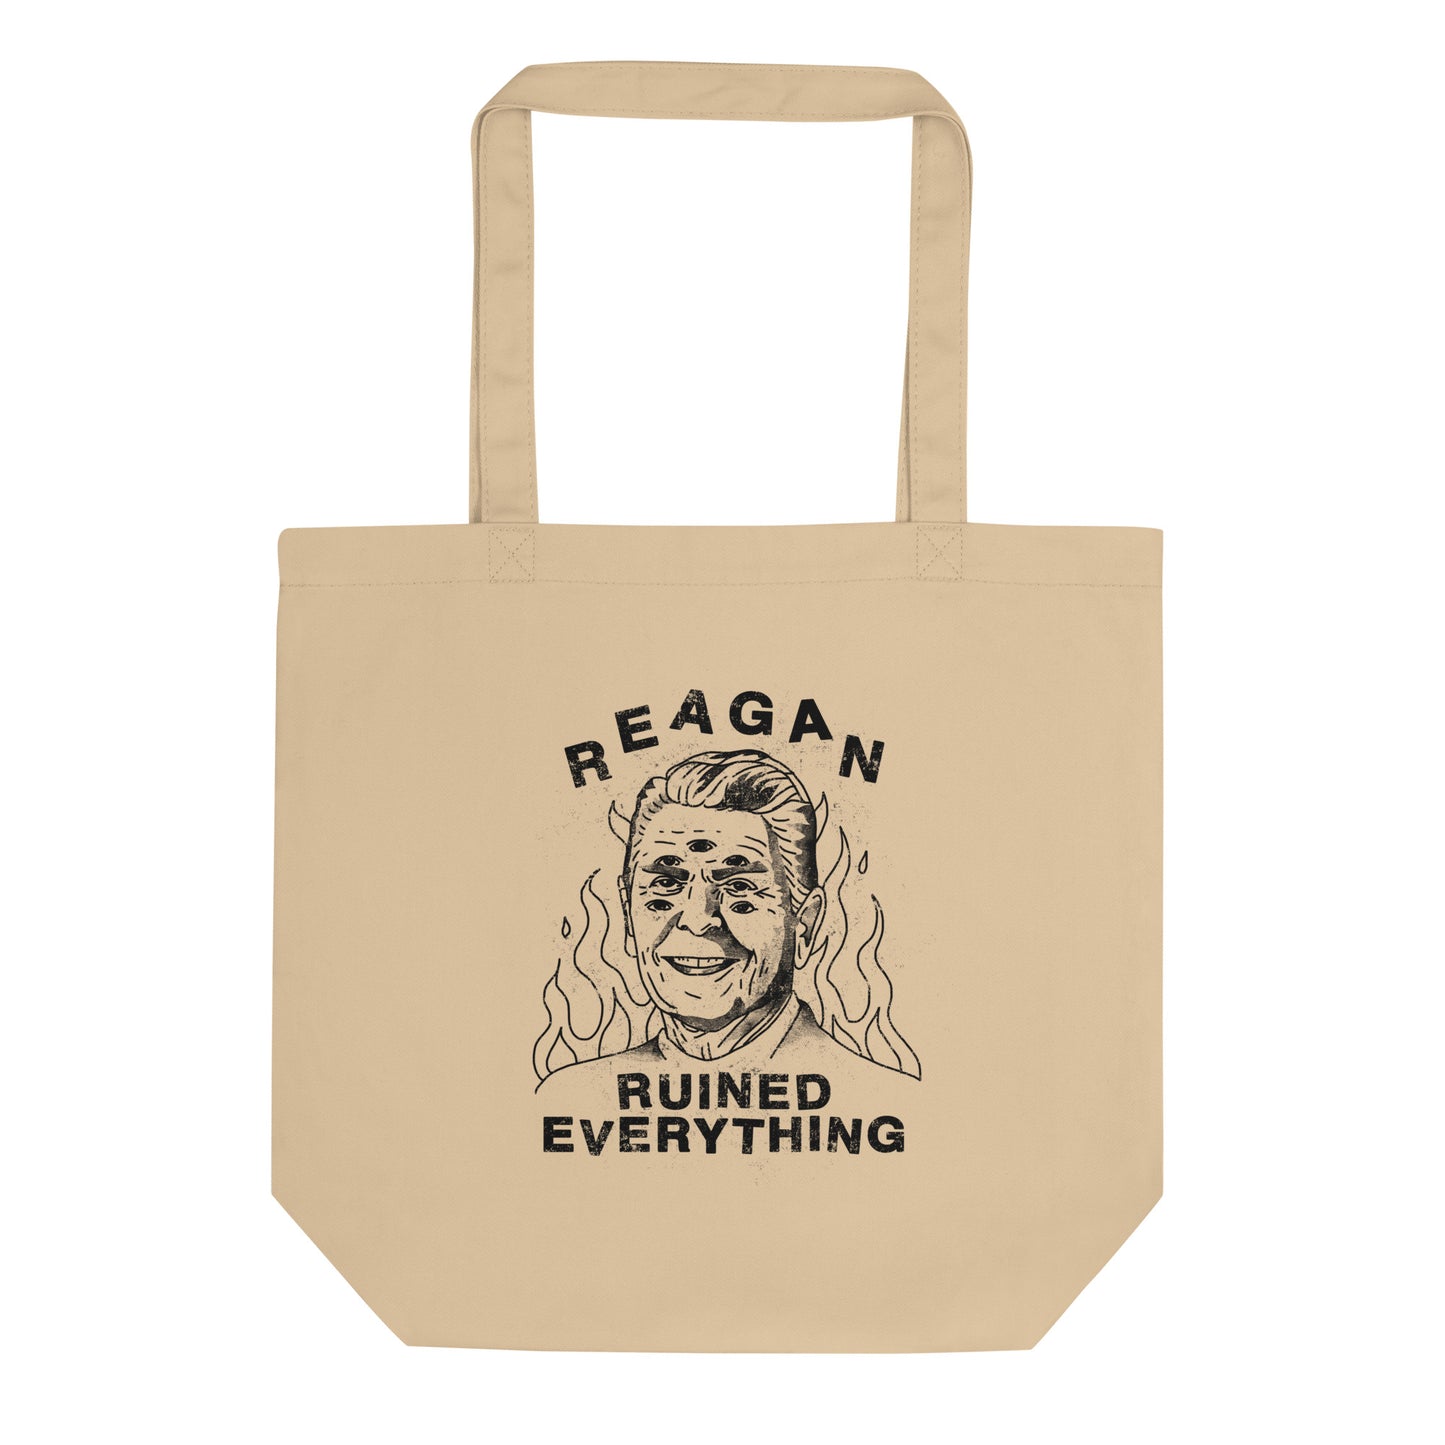 Reagan Ruined Everything! Tote Bag